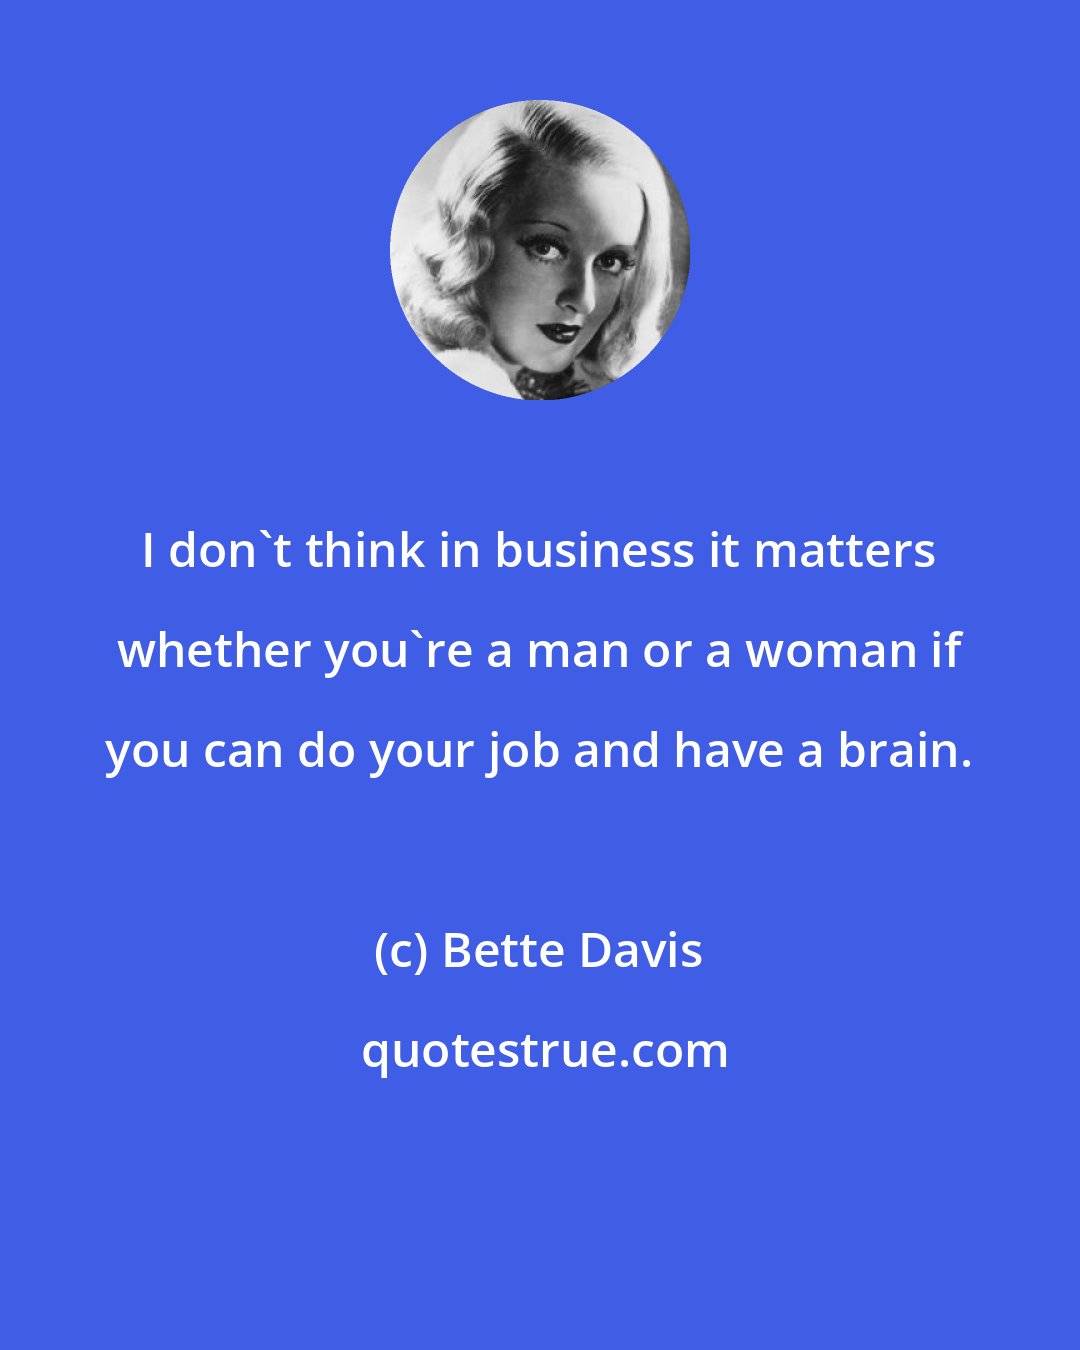 Bette Davis: I don't think in business it matters whether you're a man or a woman if you can do your job and have a brain.